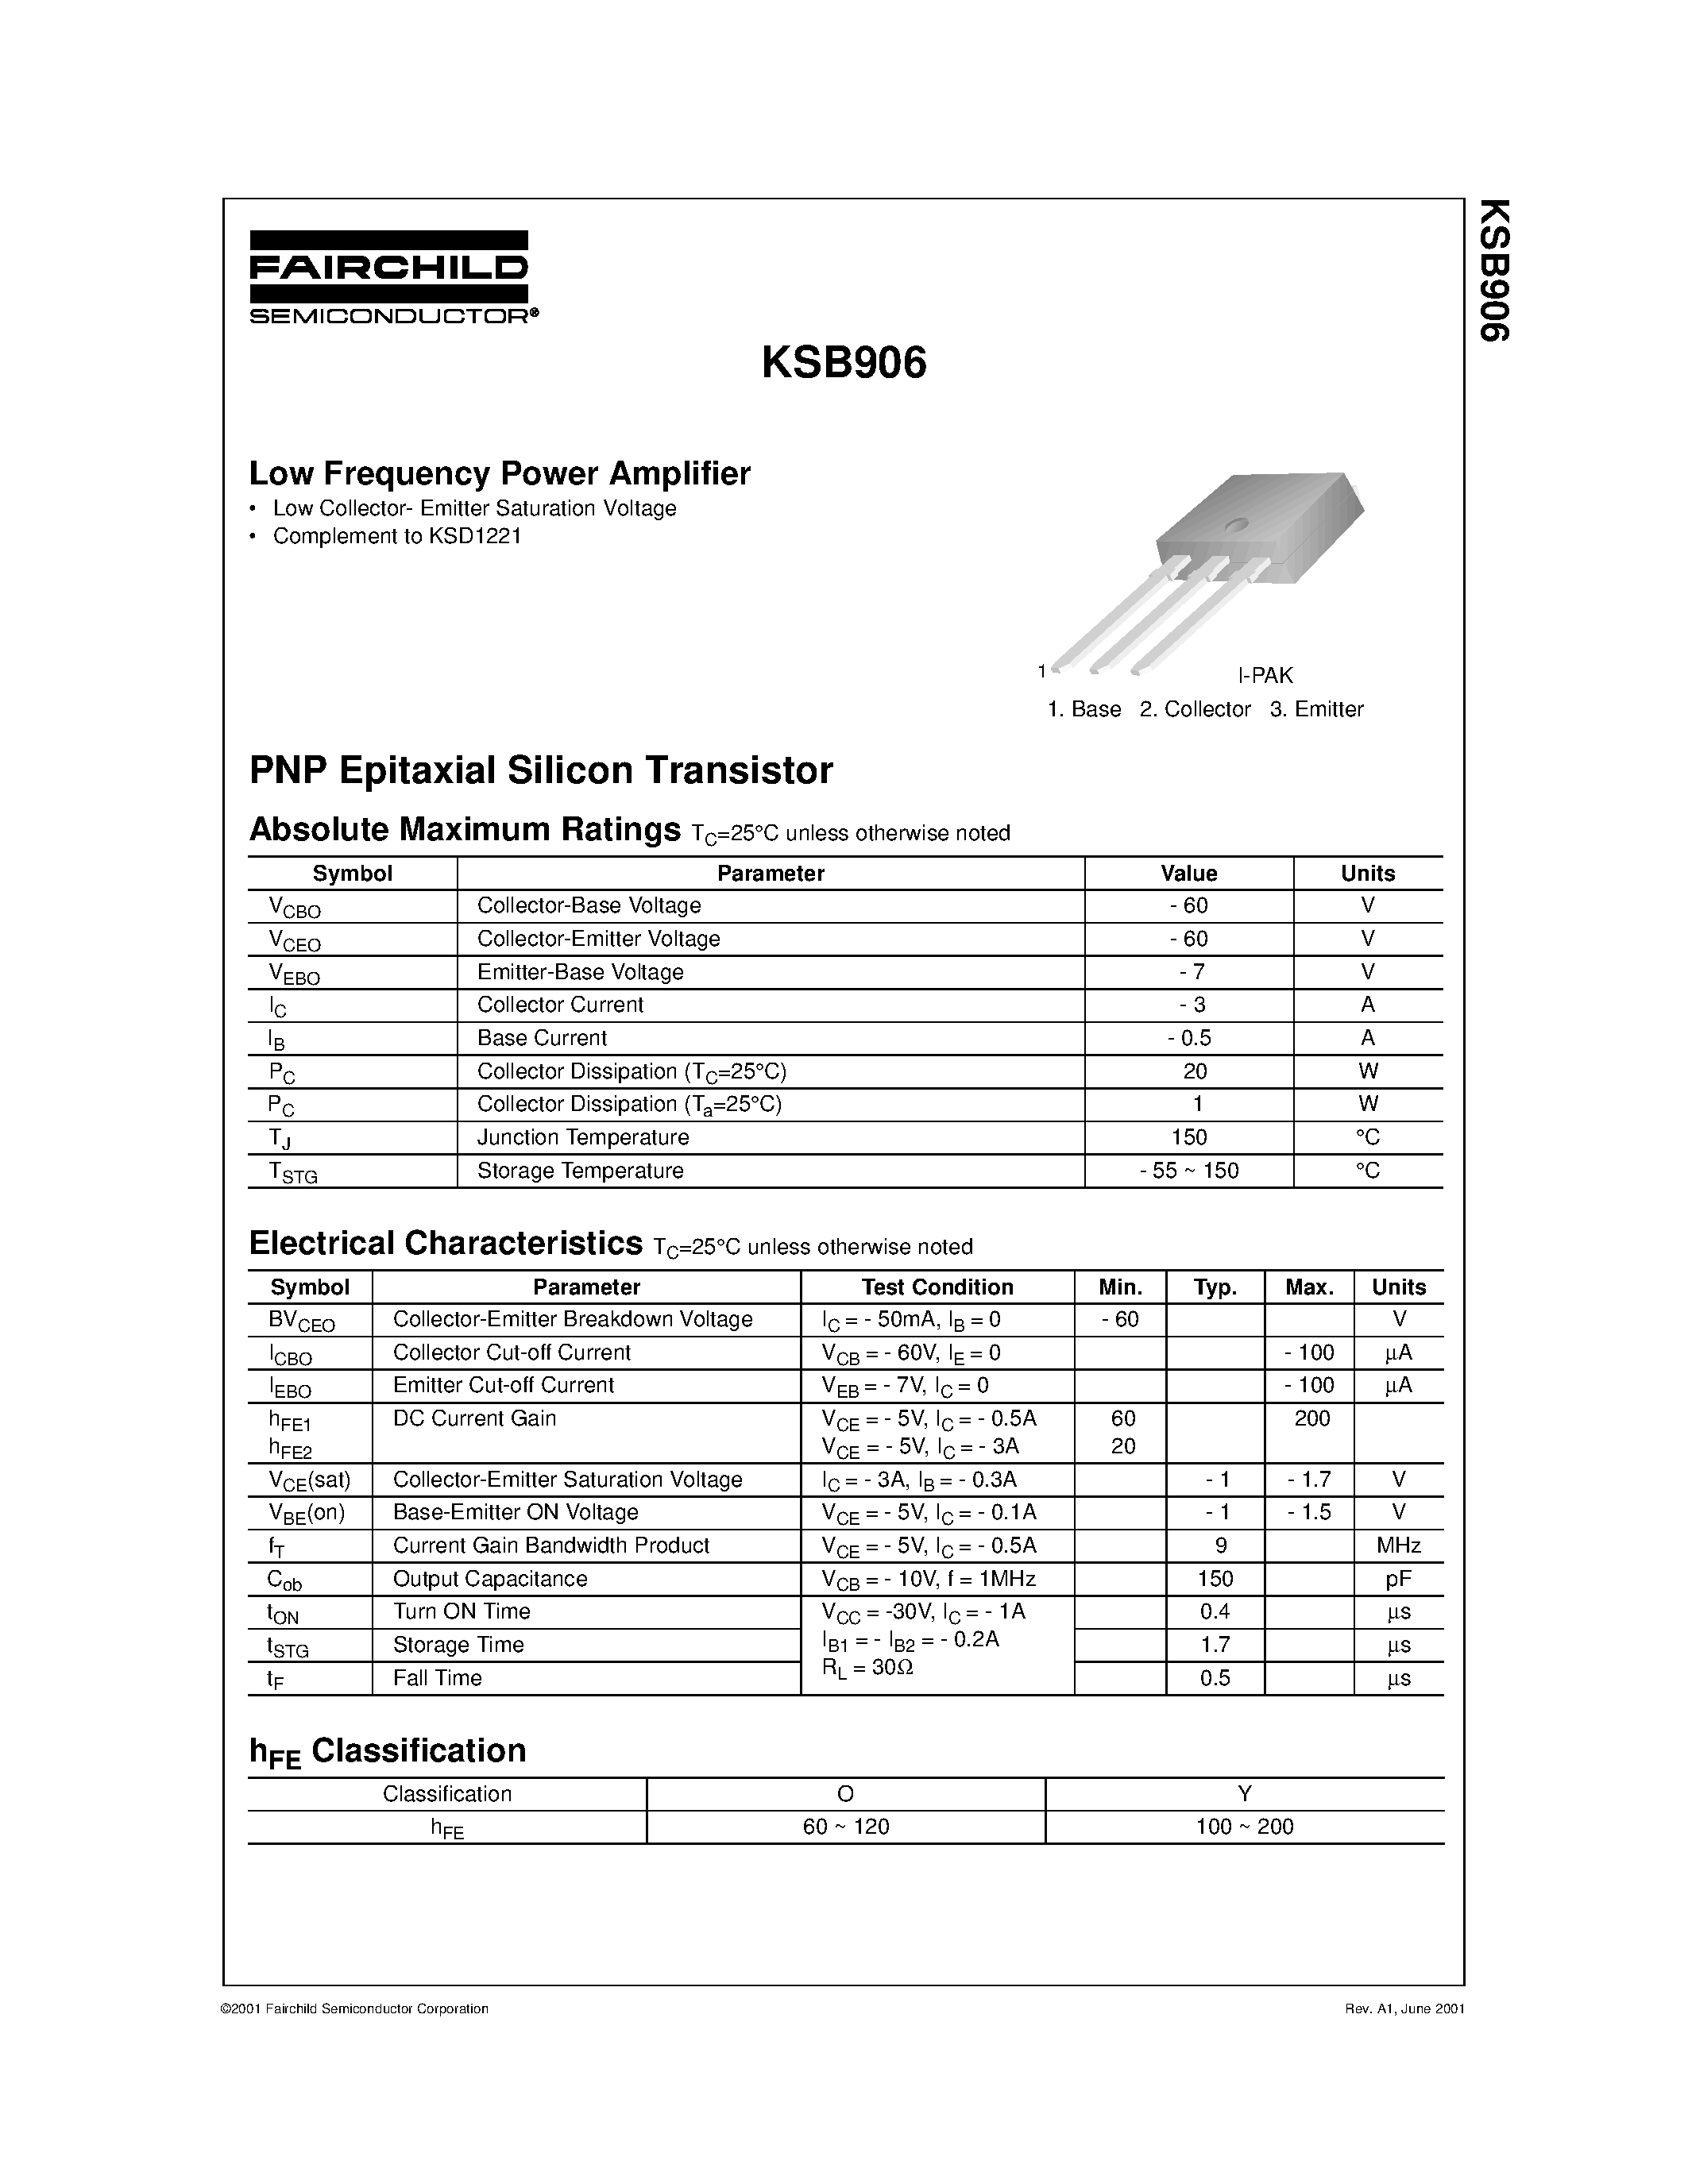 Datasheet KSB906 - Low Frequency Power Amplifier page 1